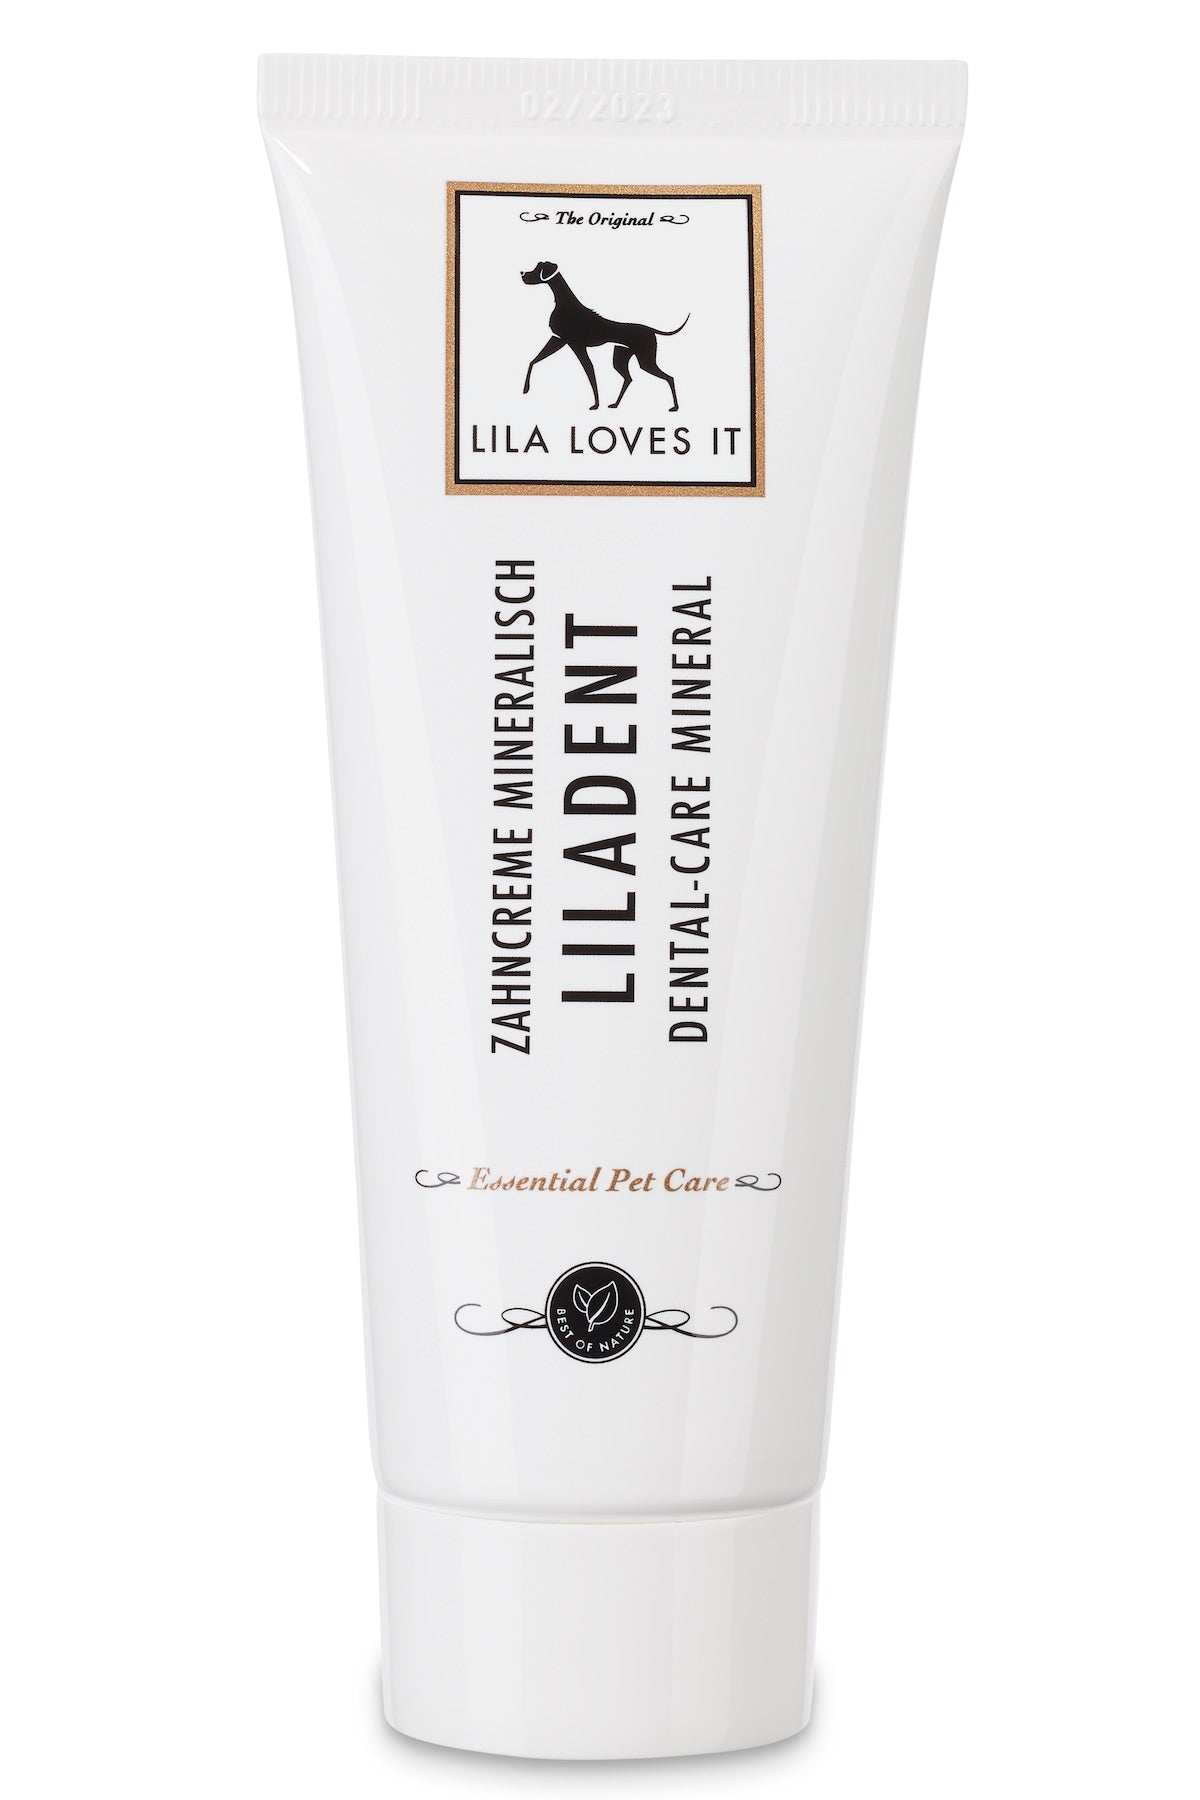 Lila-Loves-It-Liladent-Zahncreme